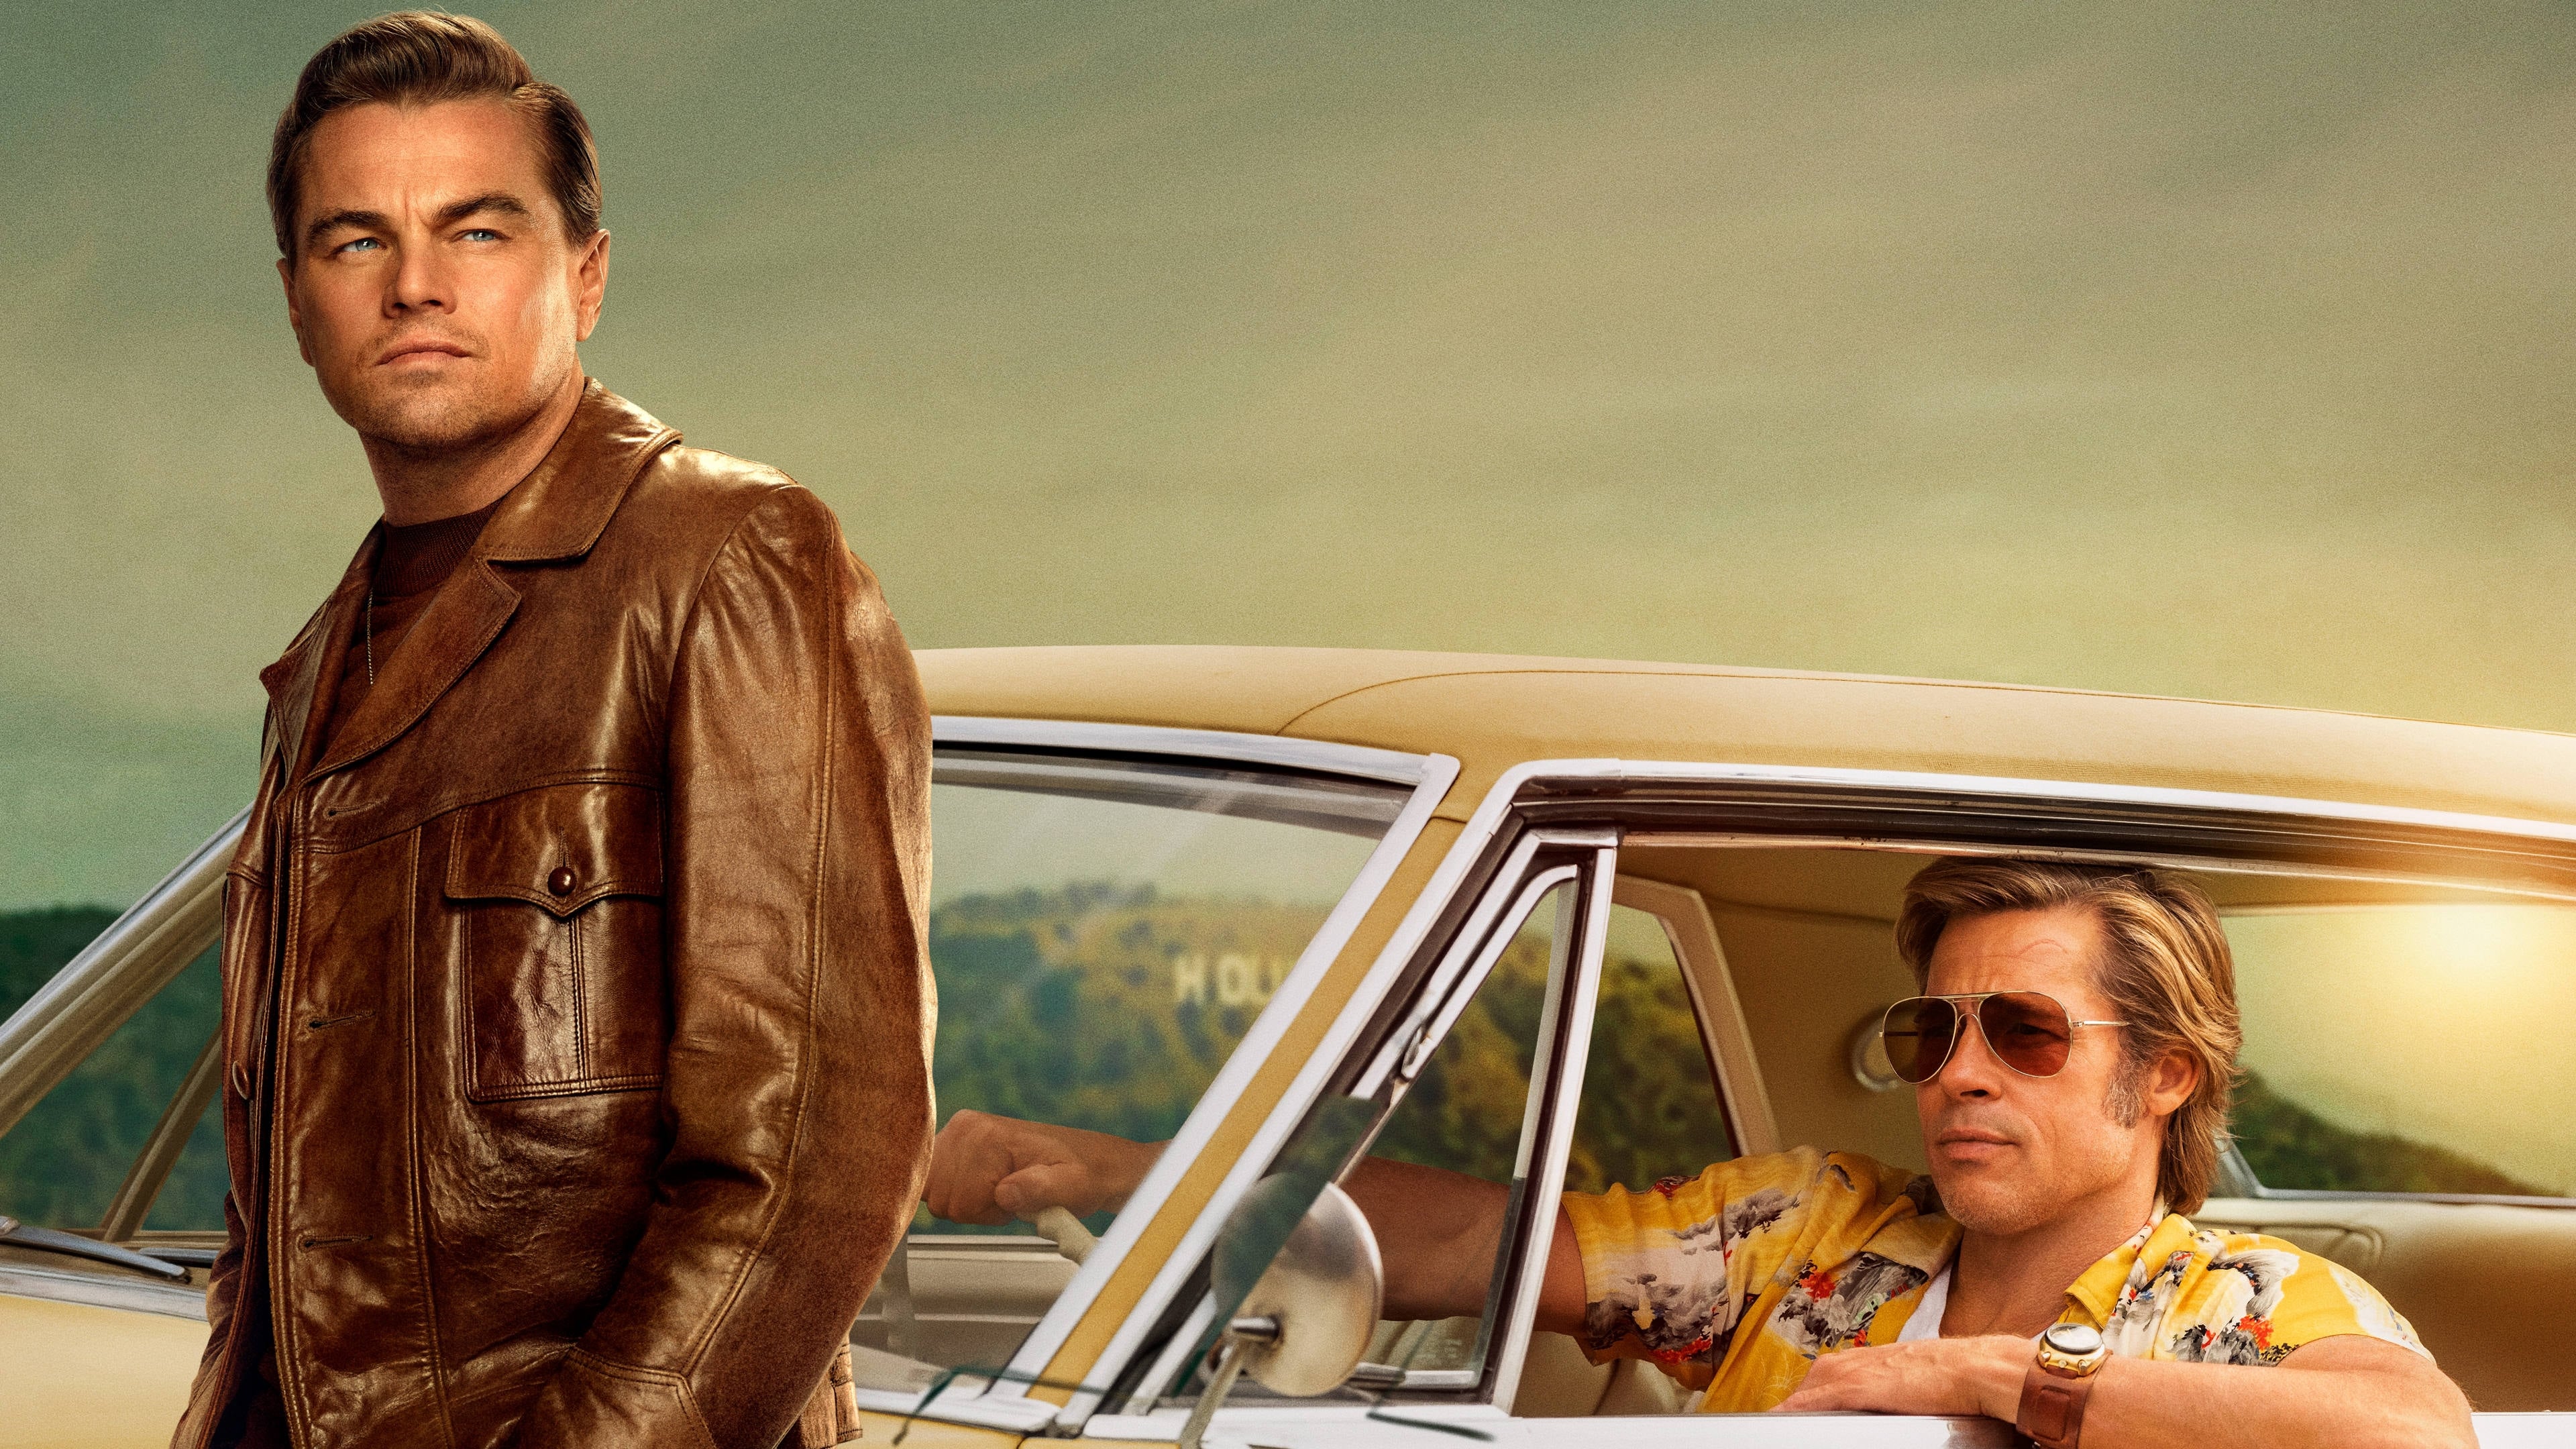 Image du film Once Upon a Time... in Hollywood (version longue) rukebpmqumcp8oroeo5ayay29mgjpg